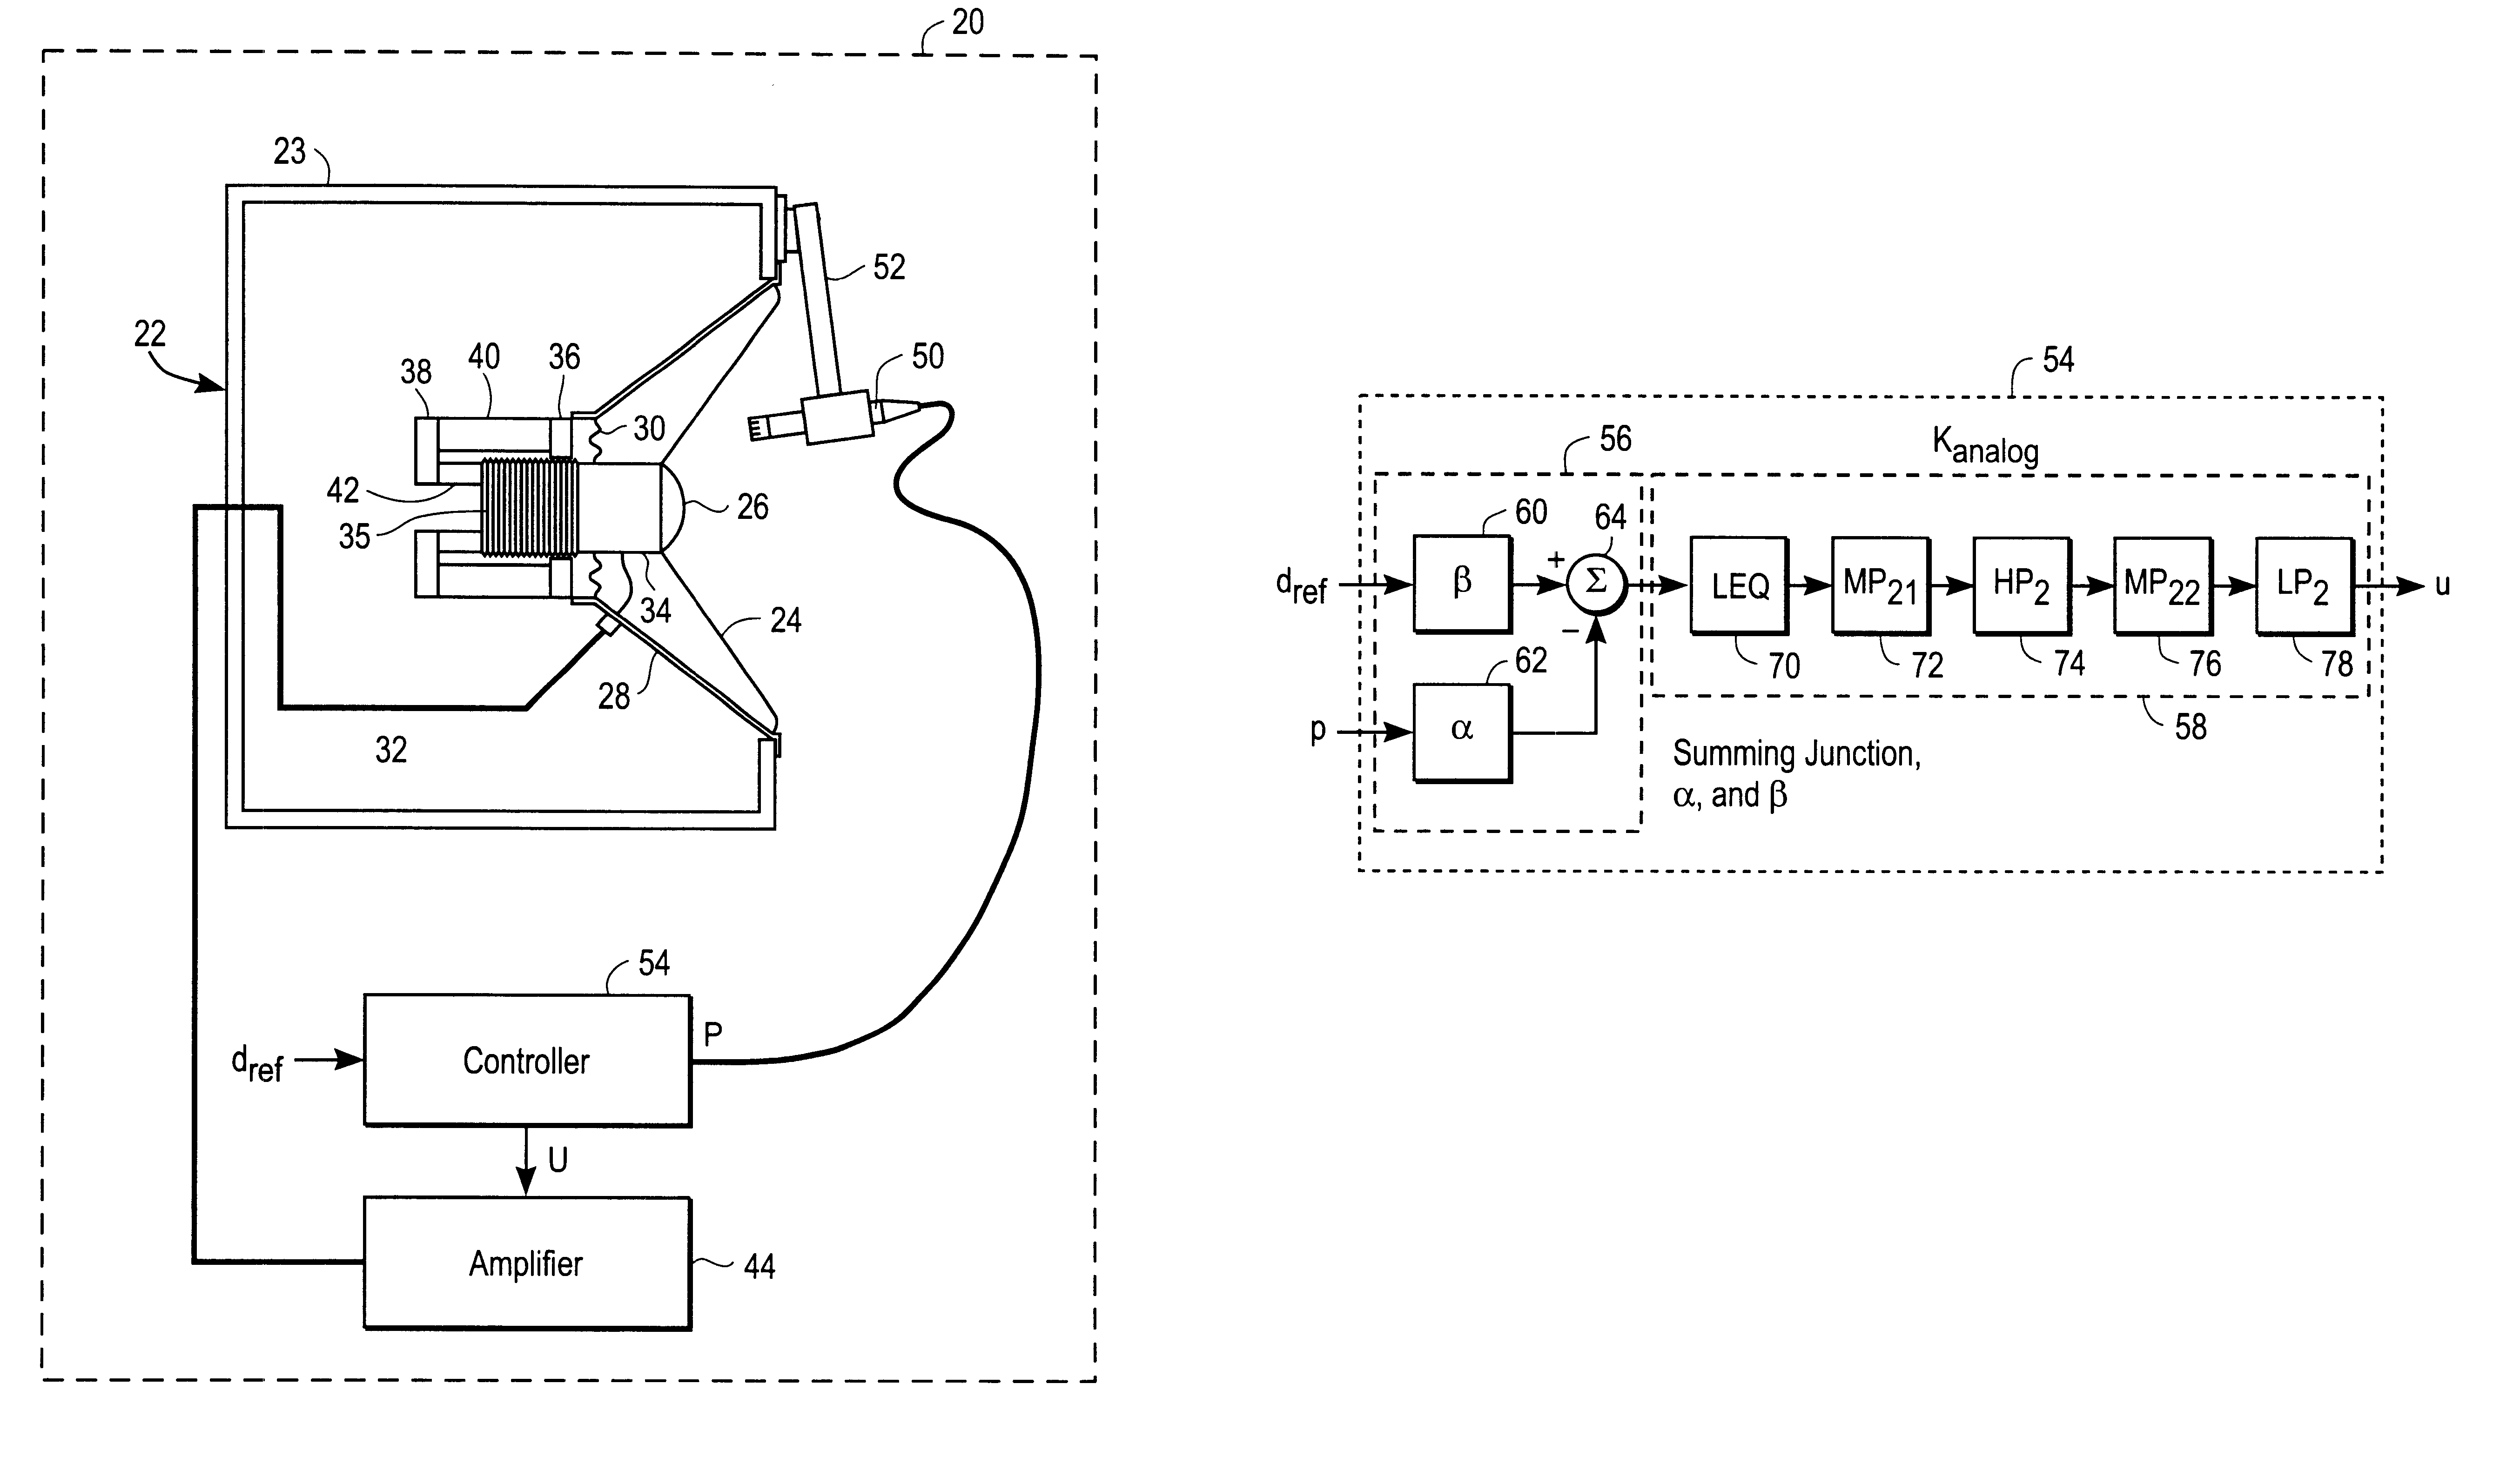 Loudspeaker system with feedback control for improved bandwidth and distortion reduction